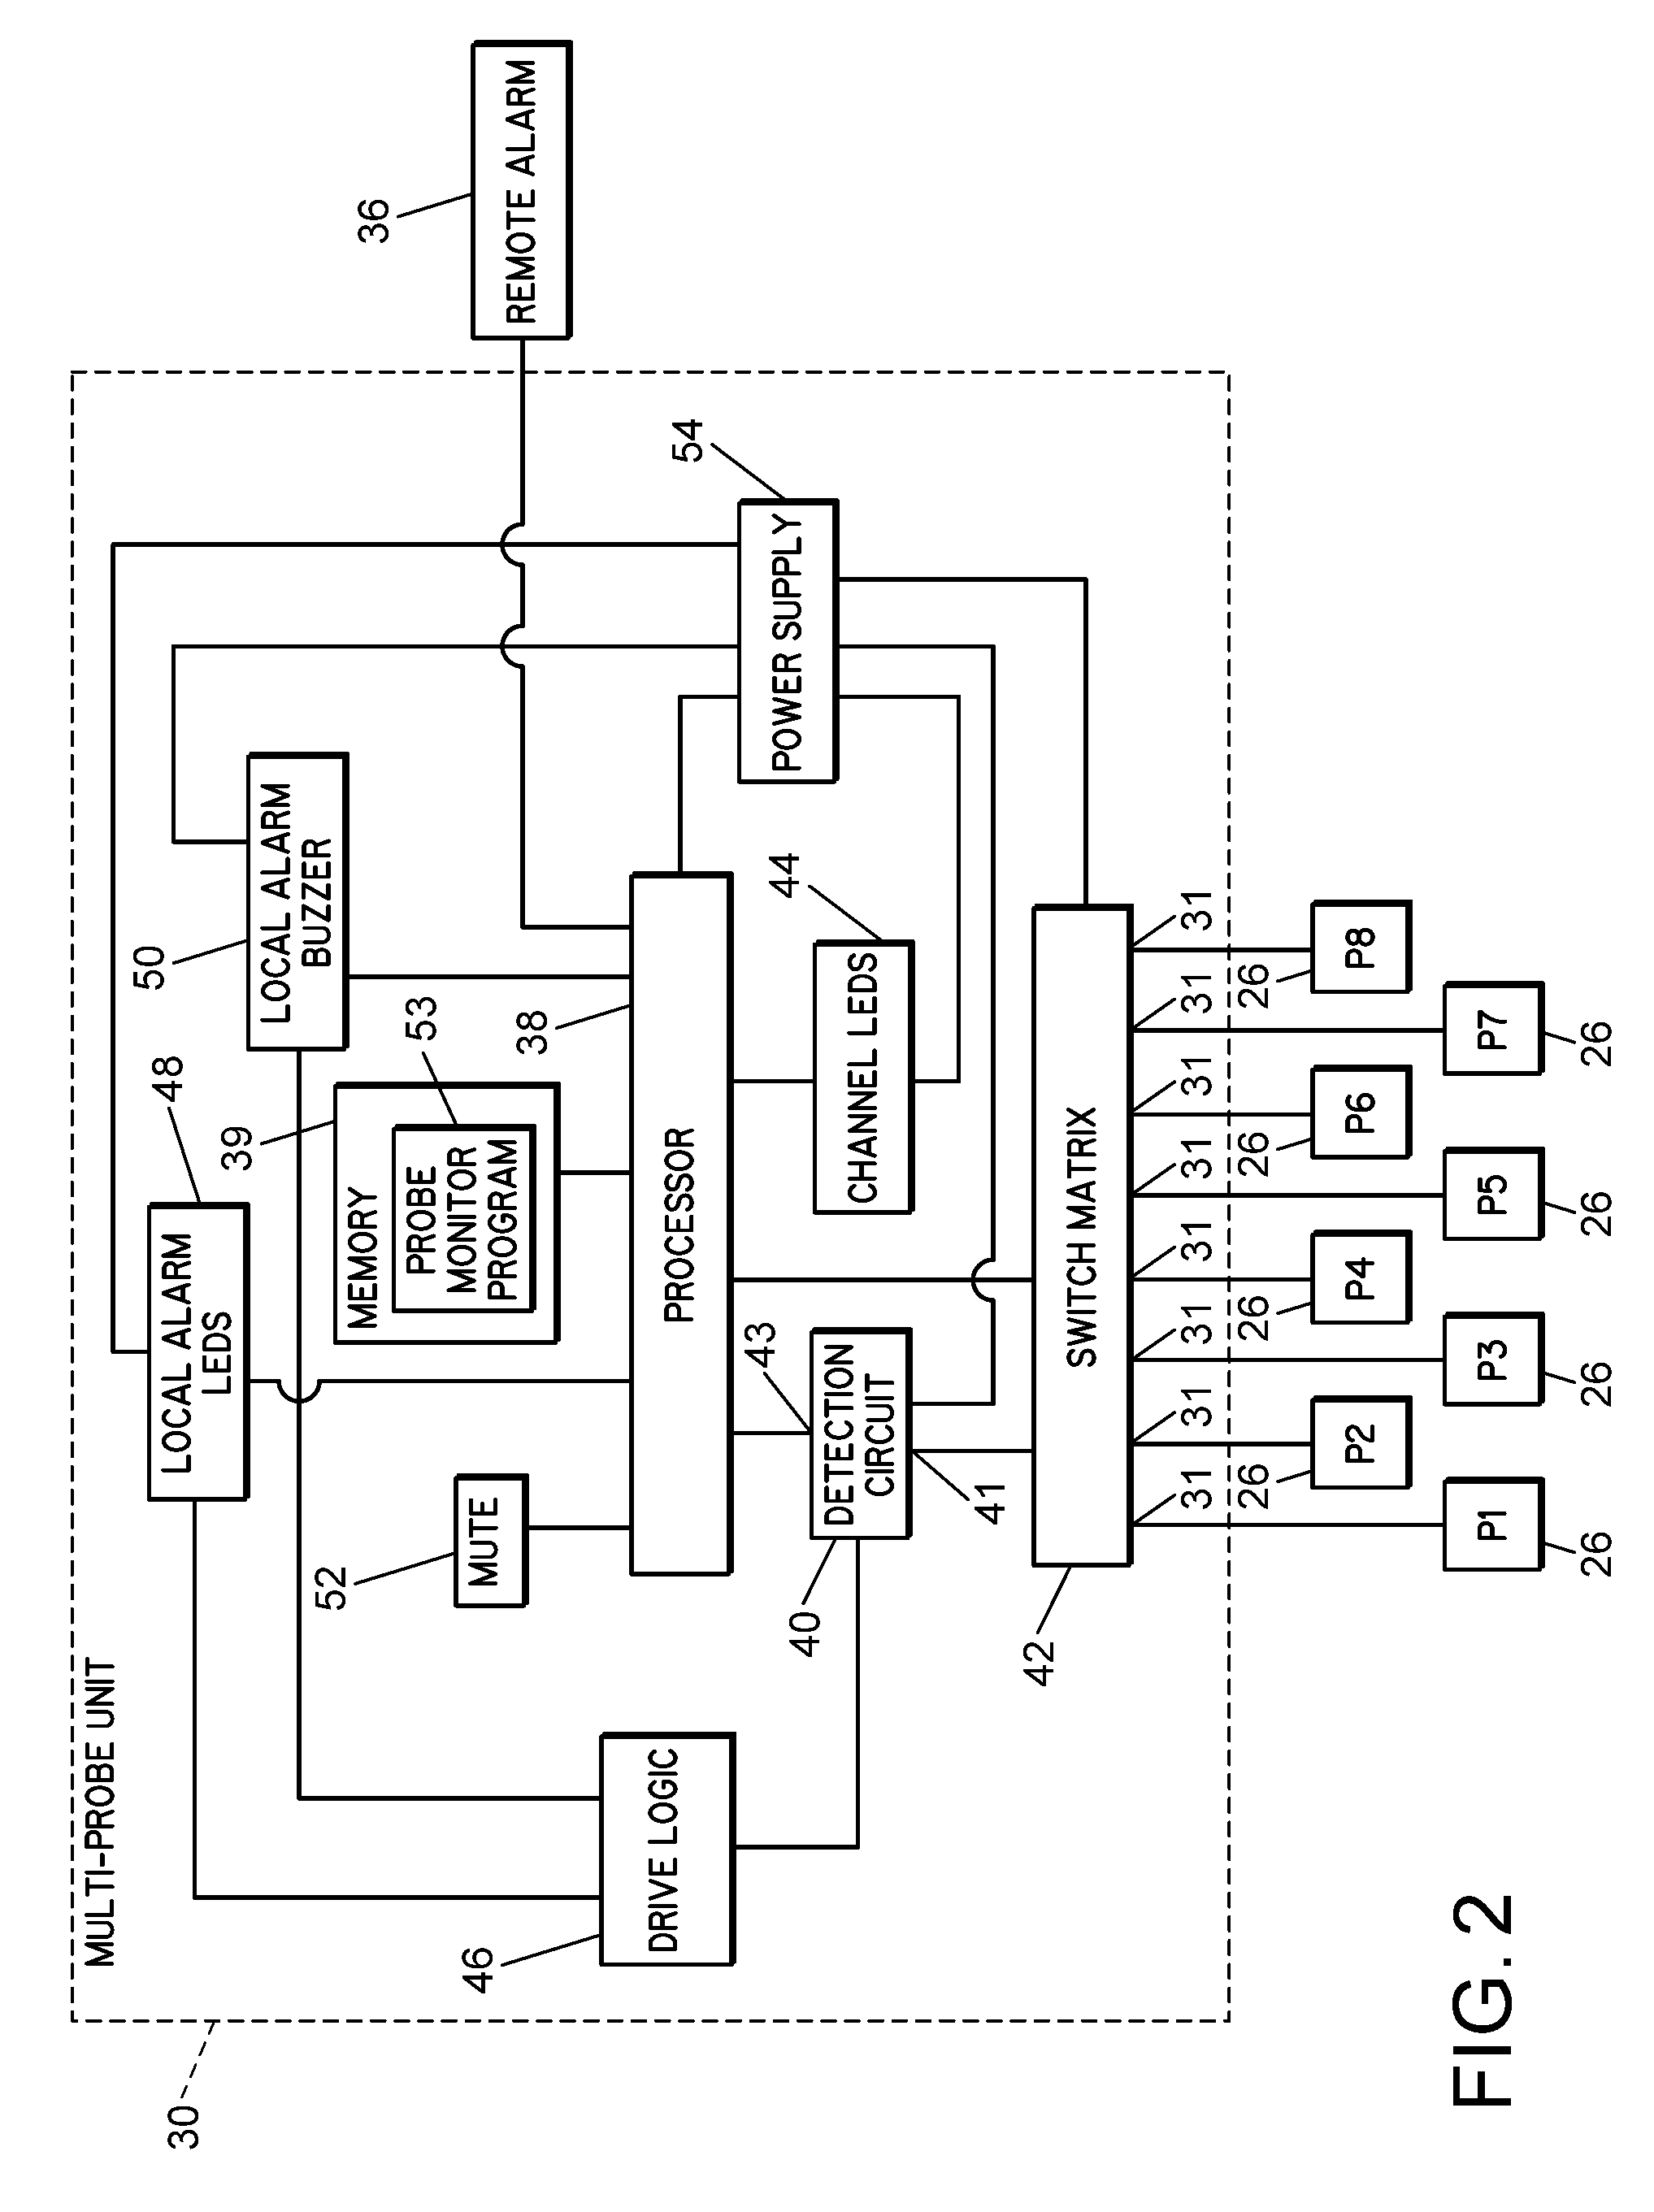 System and Method For Product Level Monitoring in A Chemical Dispensing System